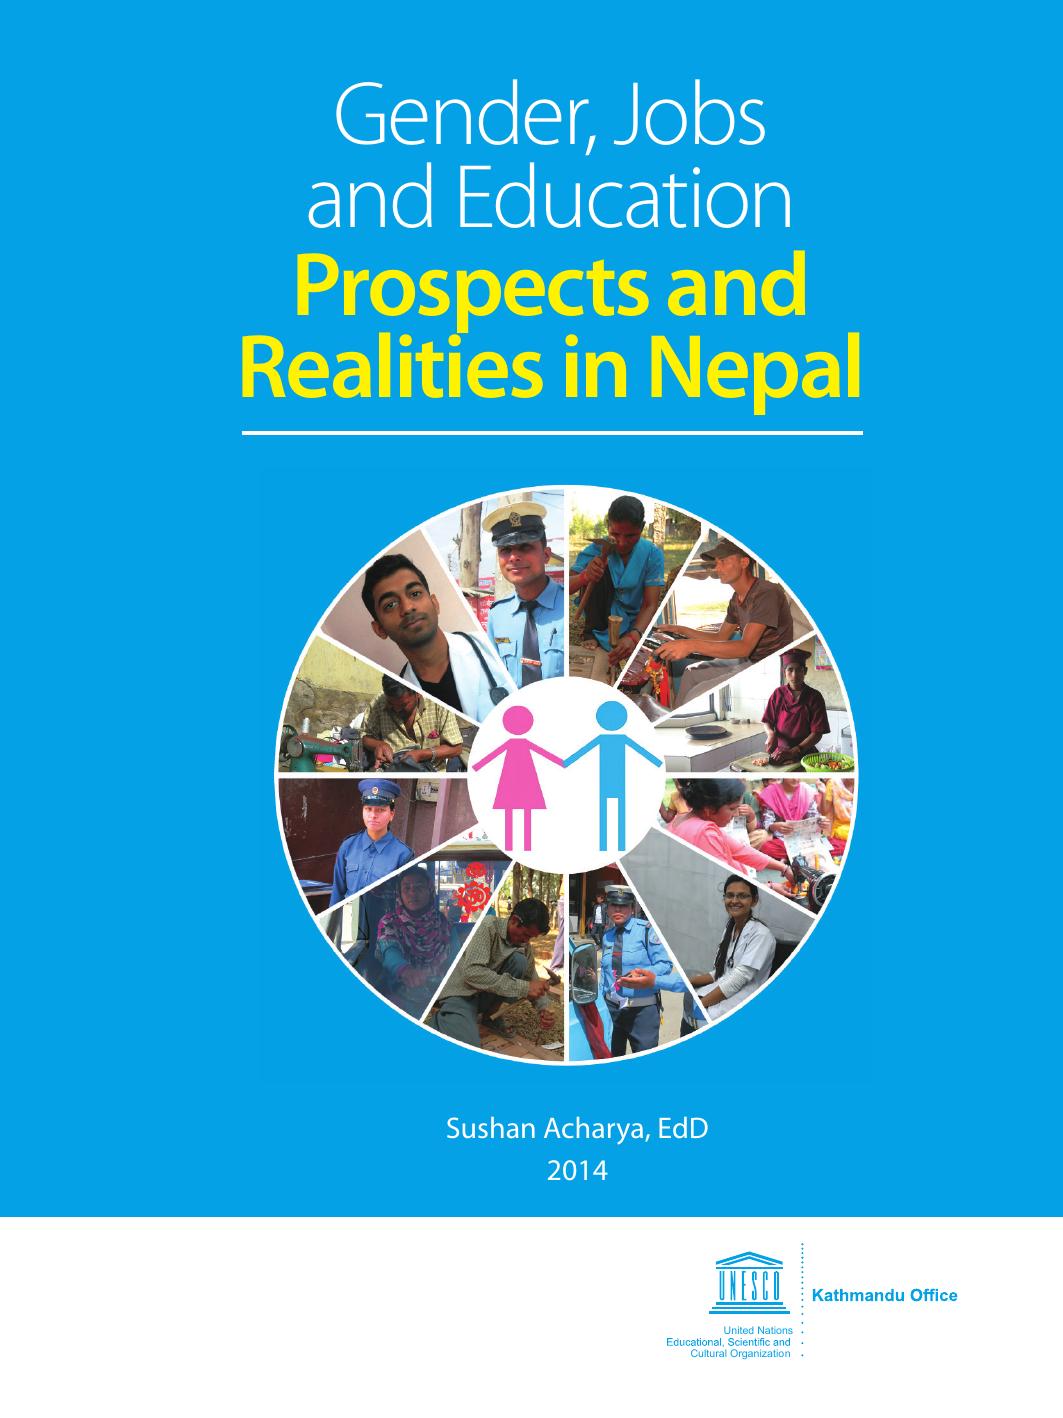 Gender, Jobs and Education: Prospects and Realities in Nepal